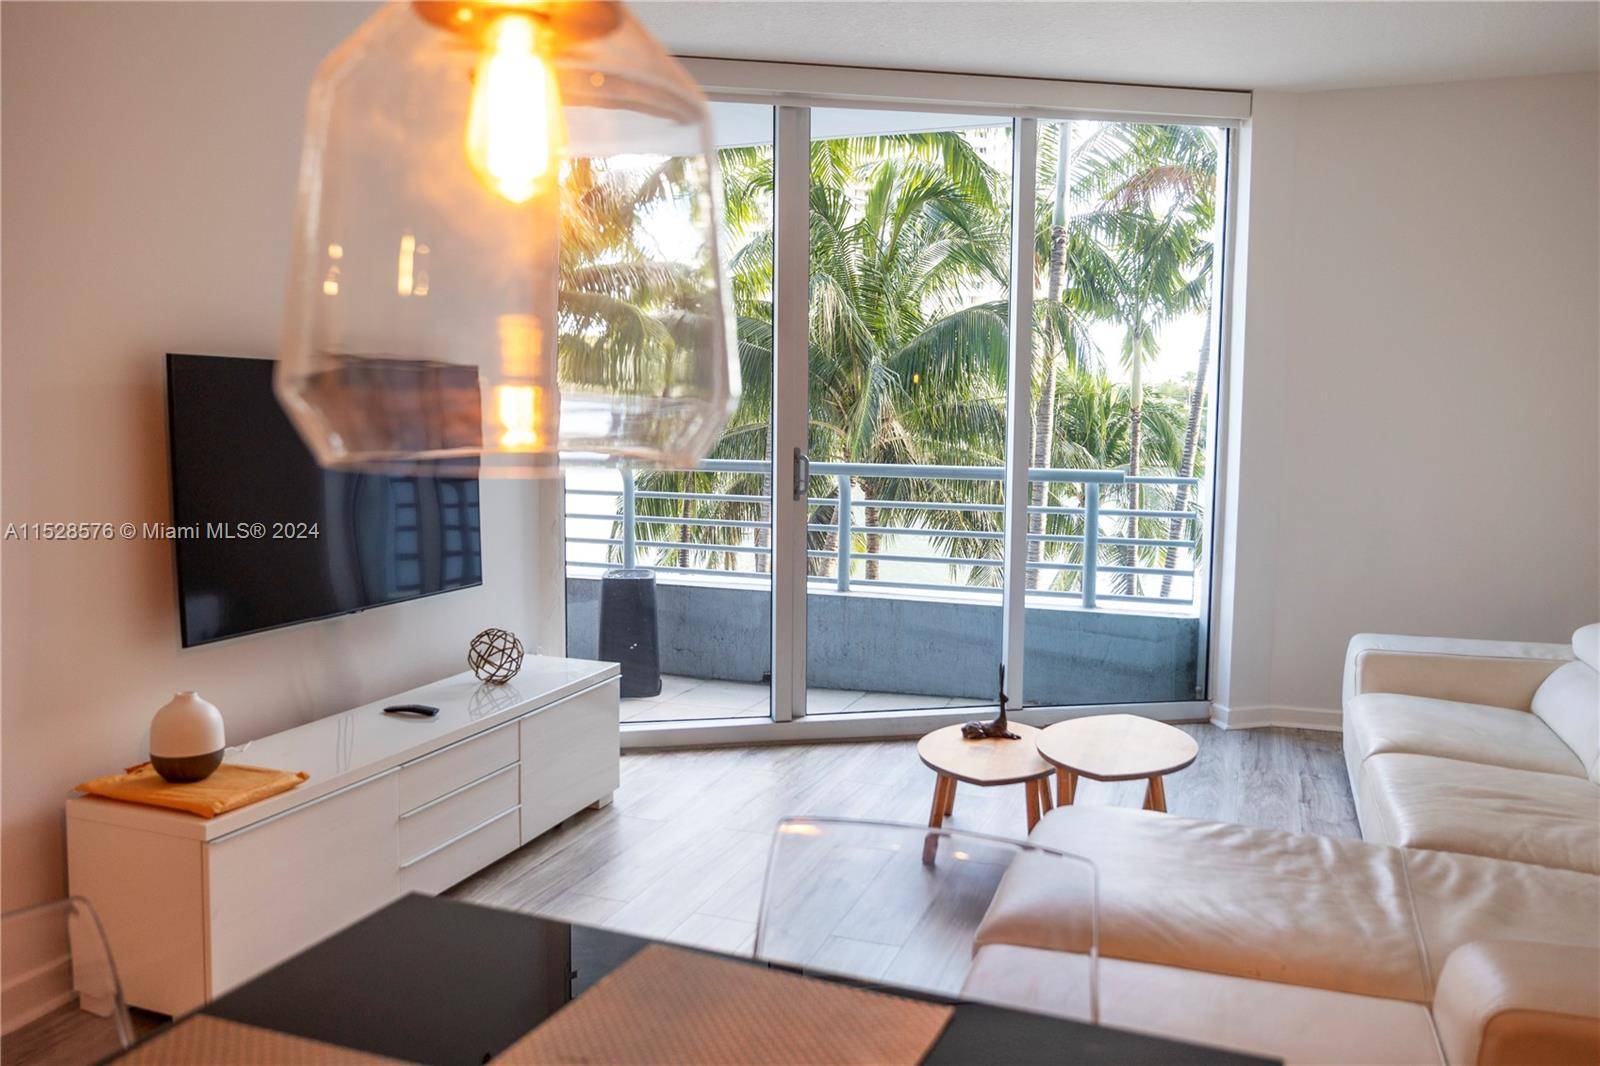 Discover the epitome of urban living in this apartment located at the epicenter of the vibrant financial district of Downtown Miami offering unparalleled access to fine dining, entertainment, and cultural ...